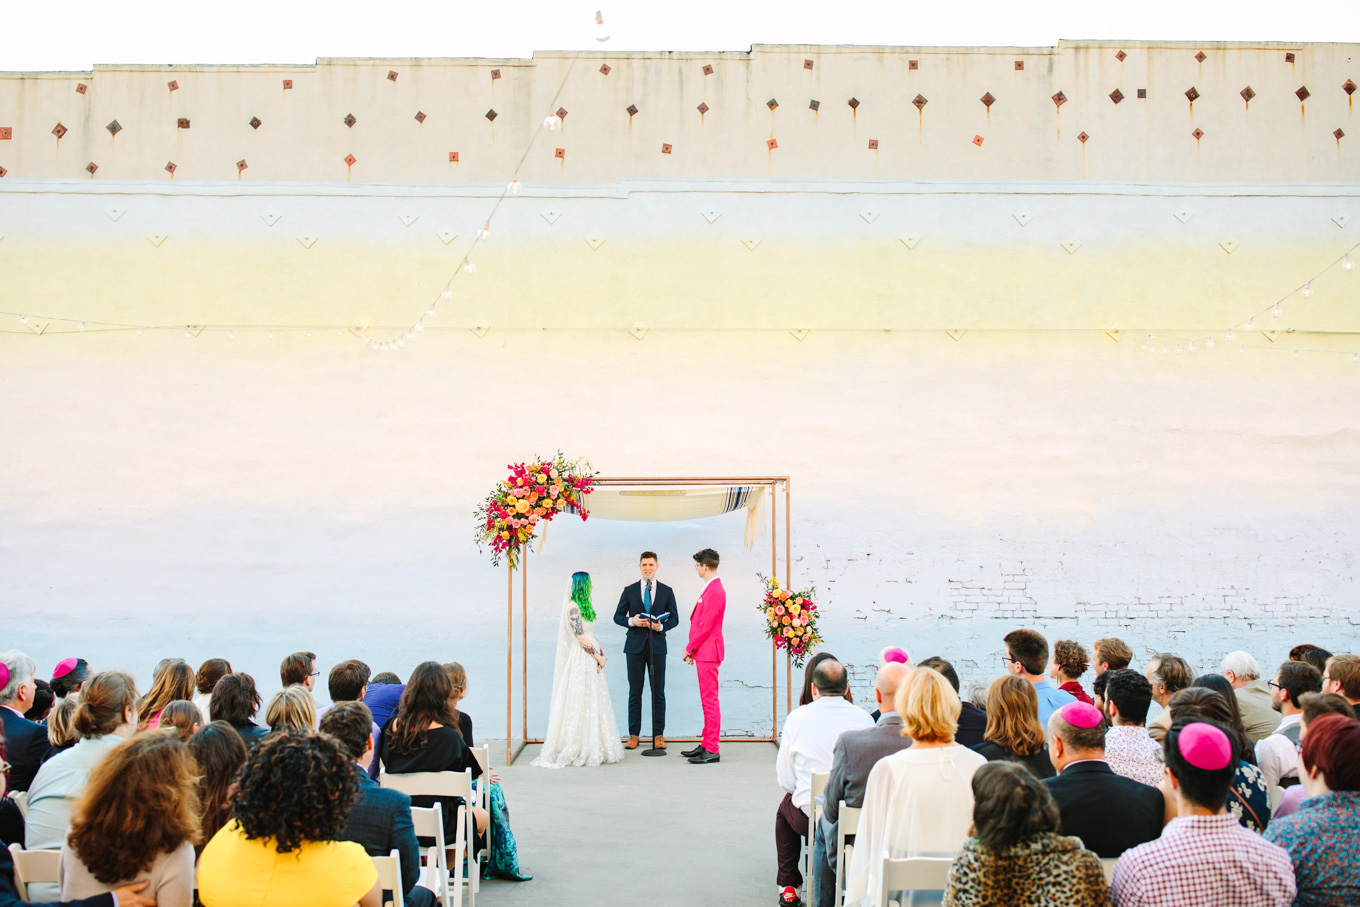 Ombre wall ceremony at | Colorful wedding at The Unique Space Los Angeles published in The Knot Magazine | Fresh and colorful photography for fun-loving couples in Southern California | #colorfulwedding #losangeleswedding #weddingphotography #uniquespace Source: Mary Costa Photography | Los Angeles